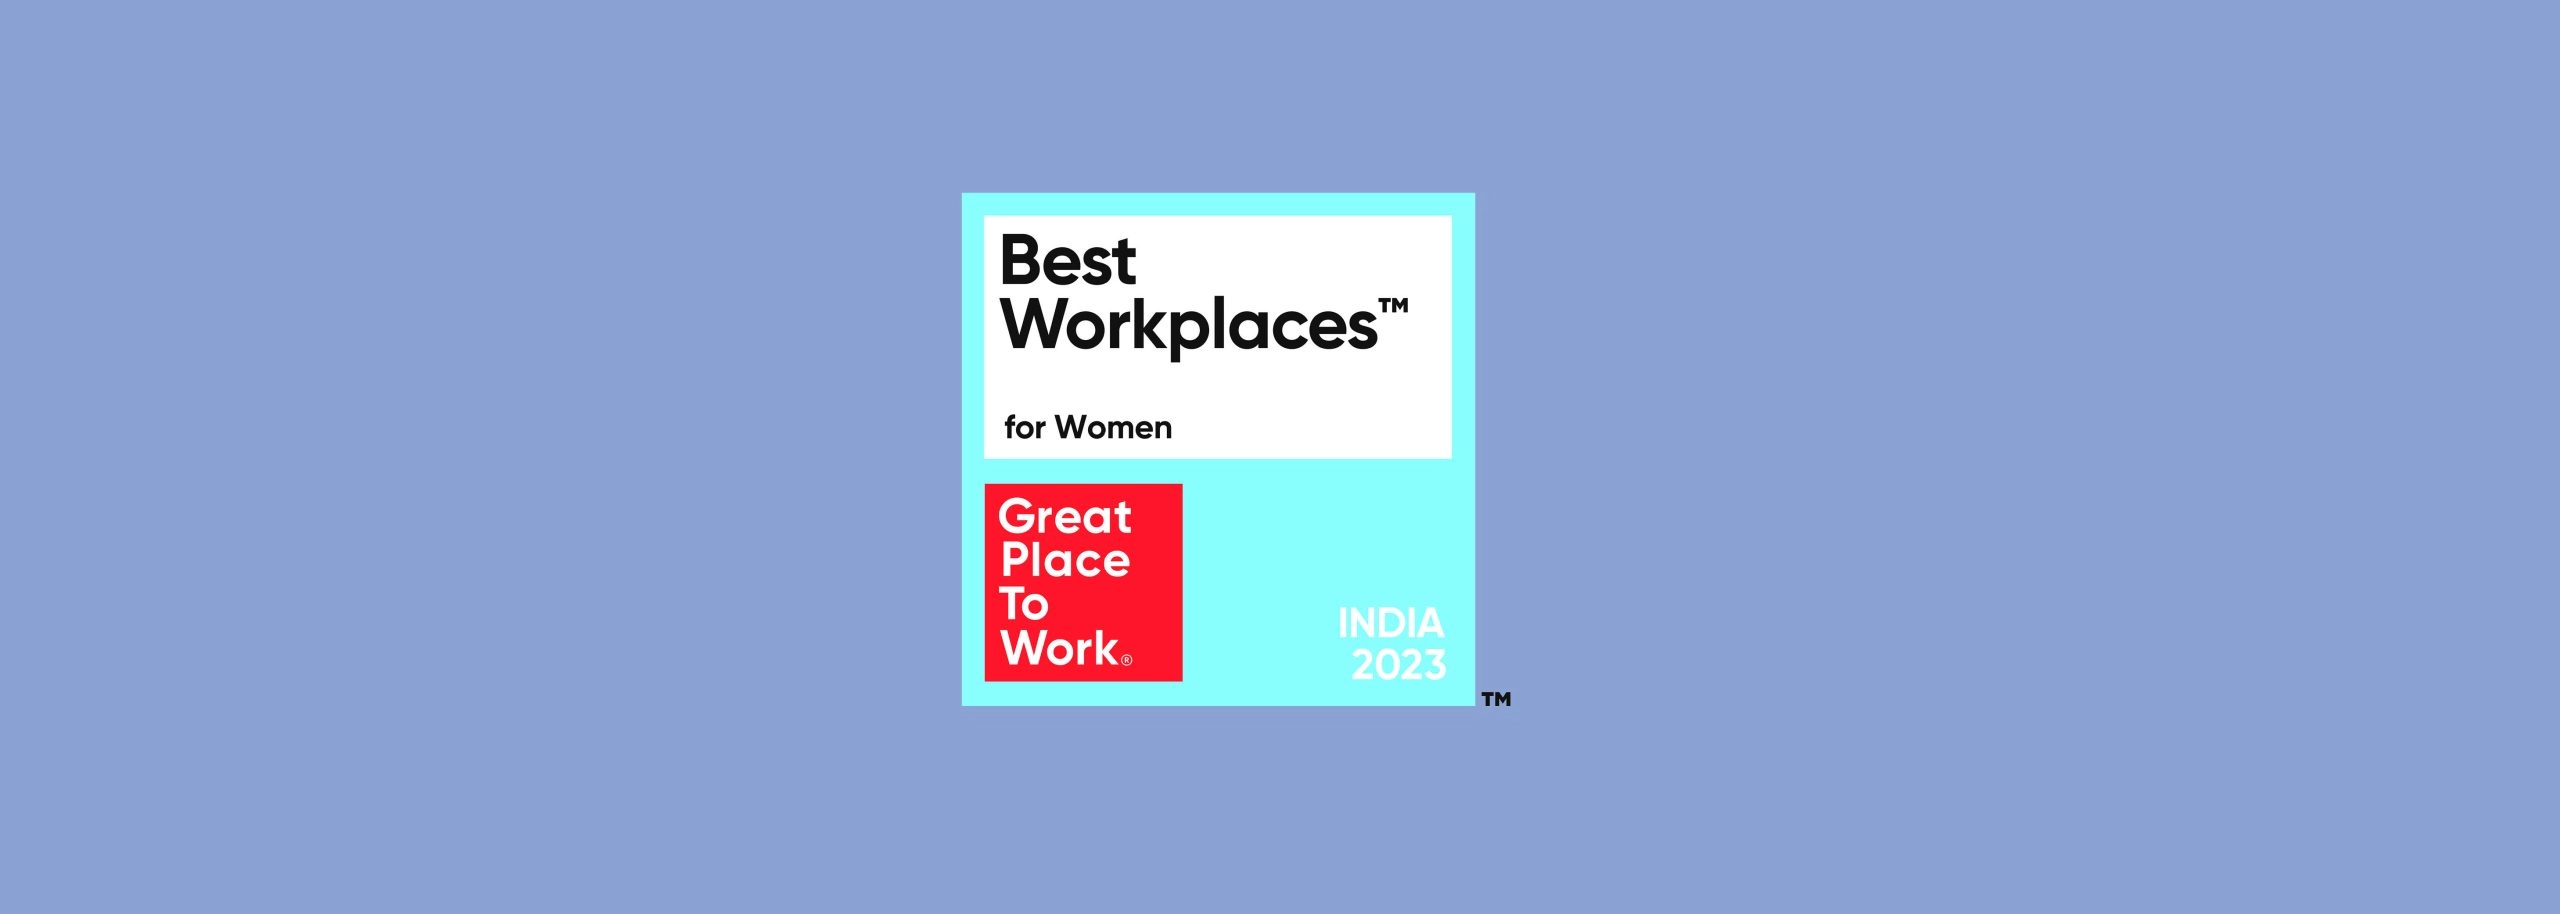 Startek® honored as one of India’s Best Workplaces in IT & IT-BPM 2023 by Great Place To Work® India